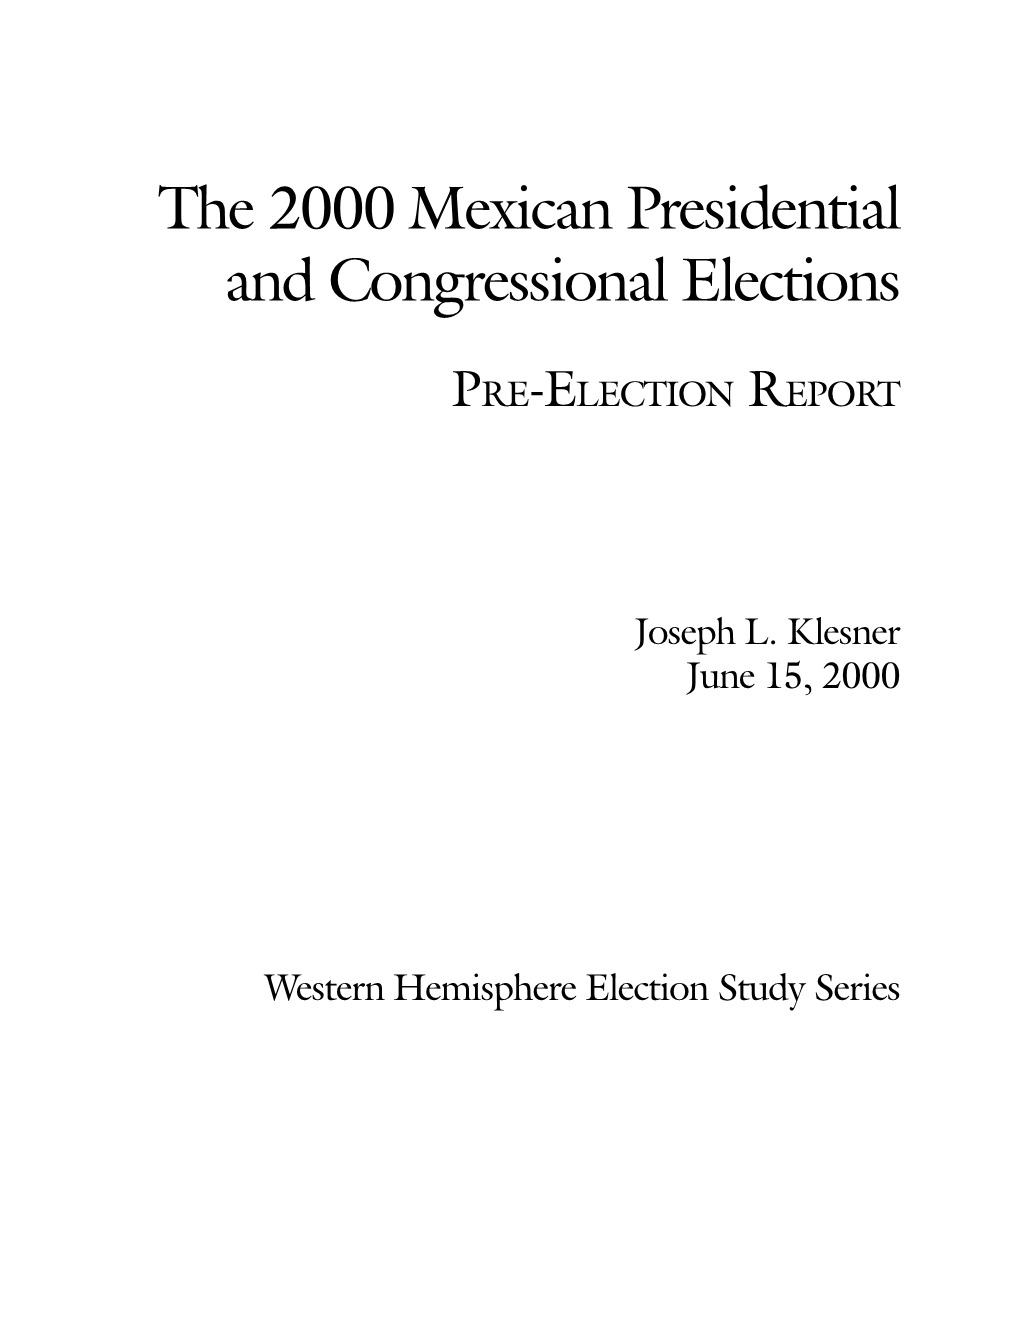 The 2000 Mexican Presidential and Congressional Elections ~